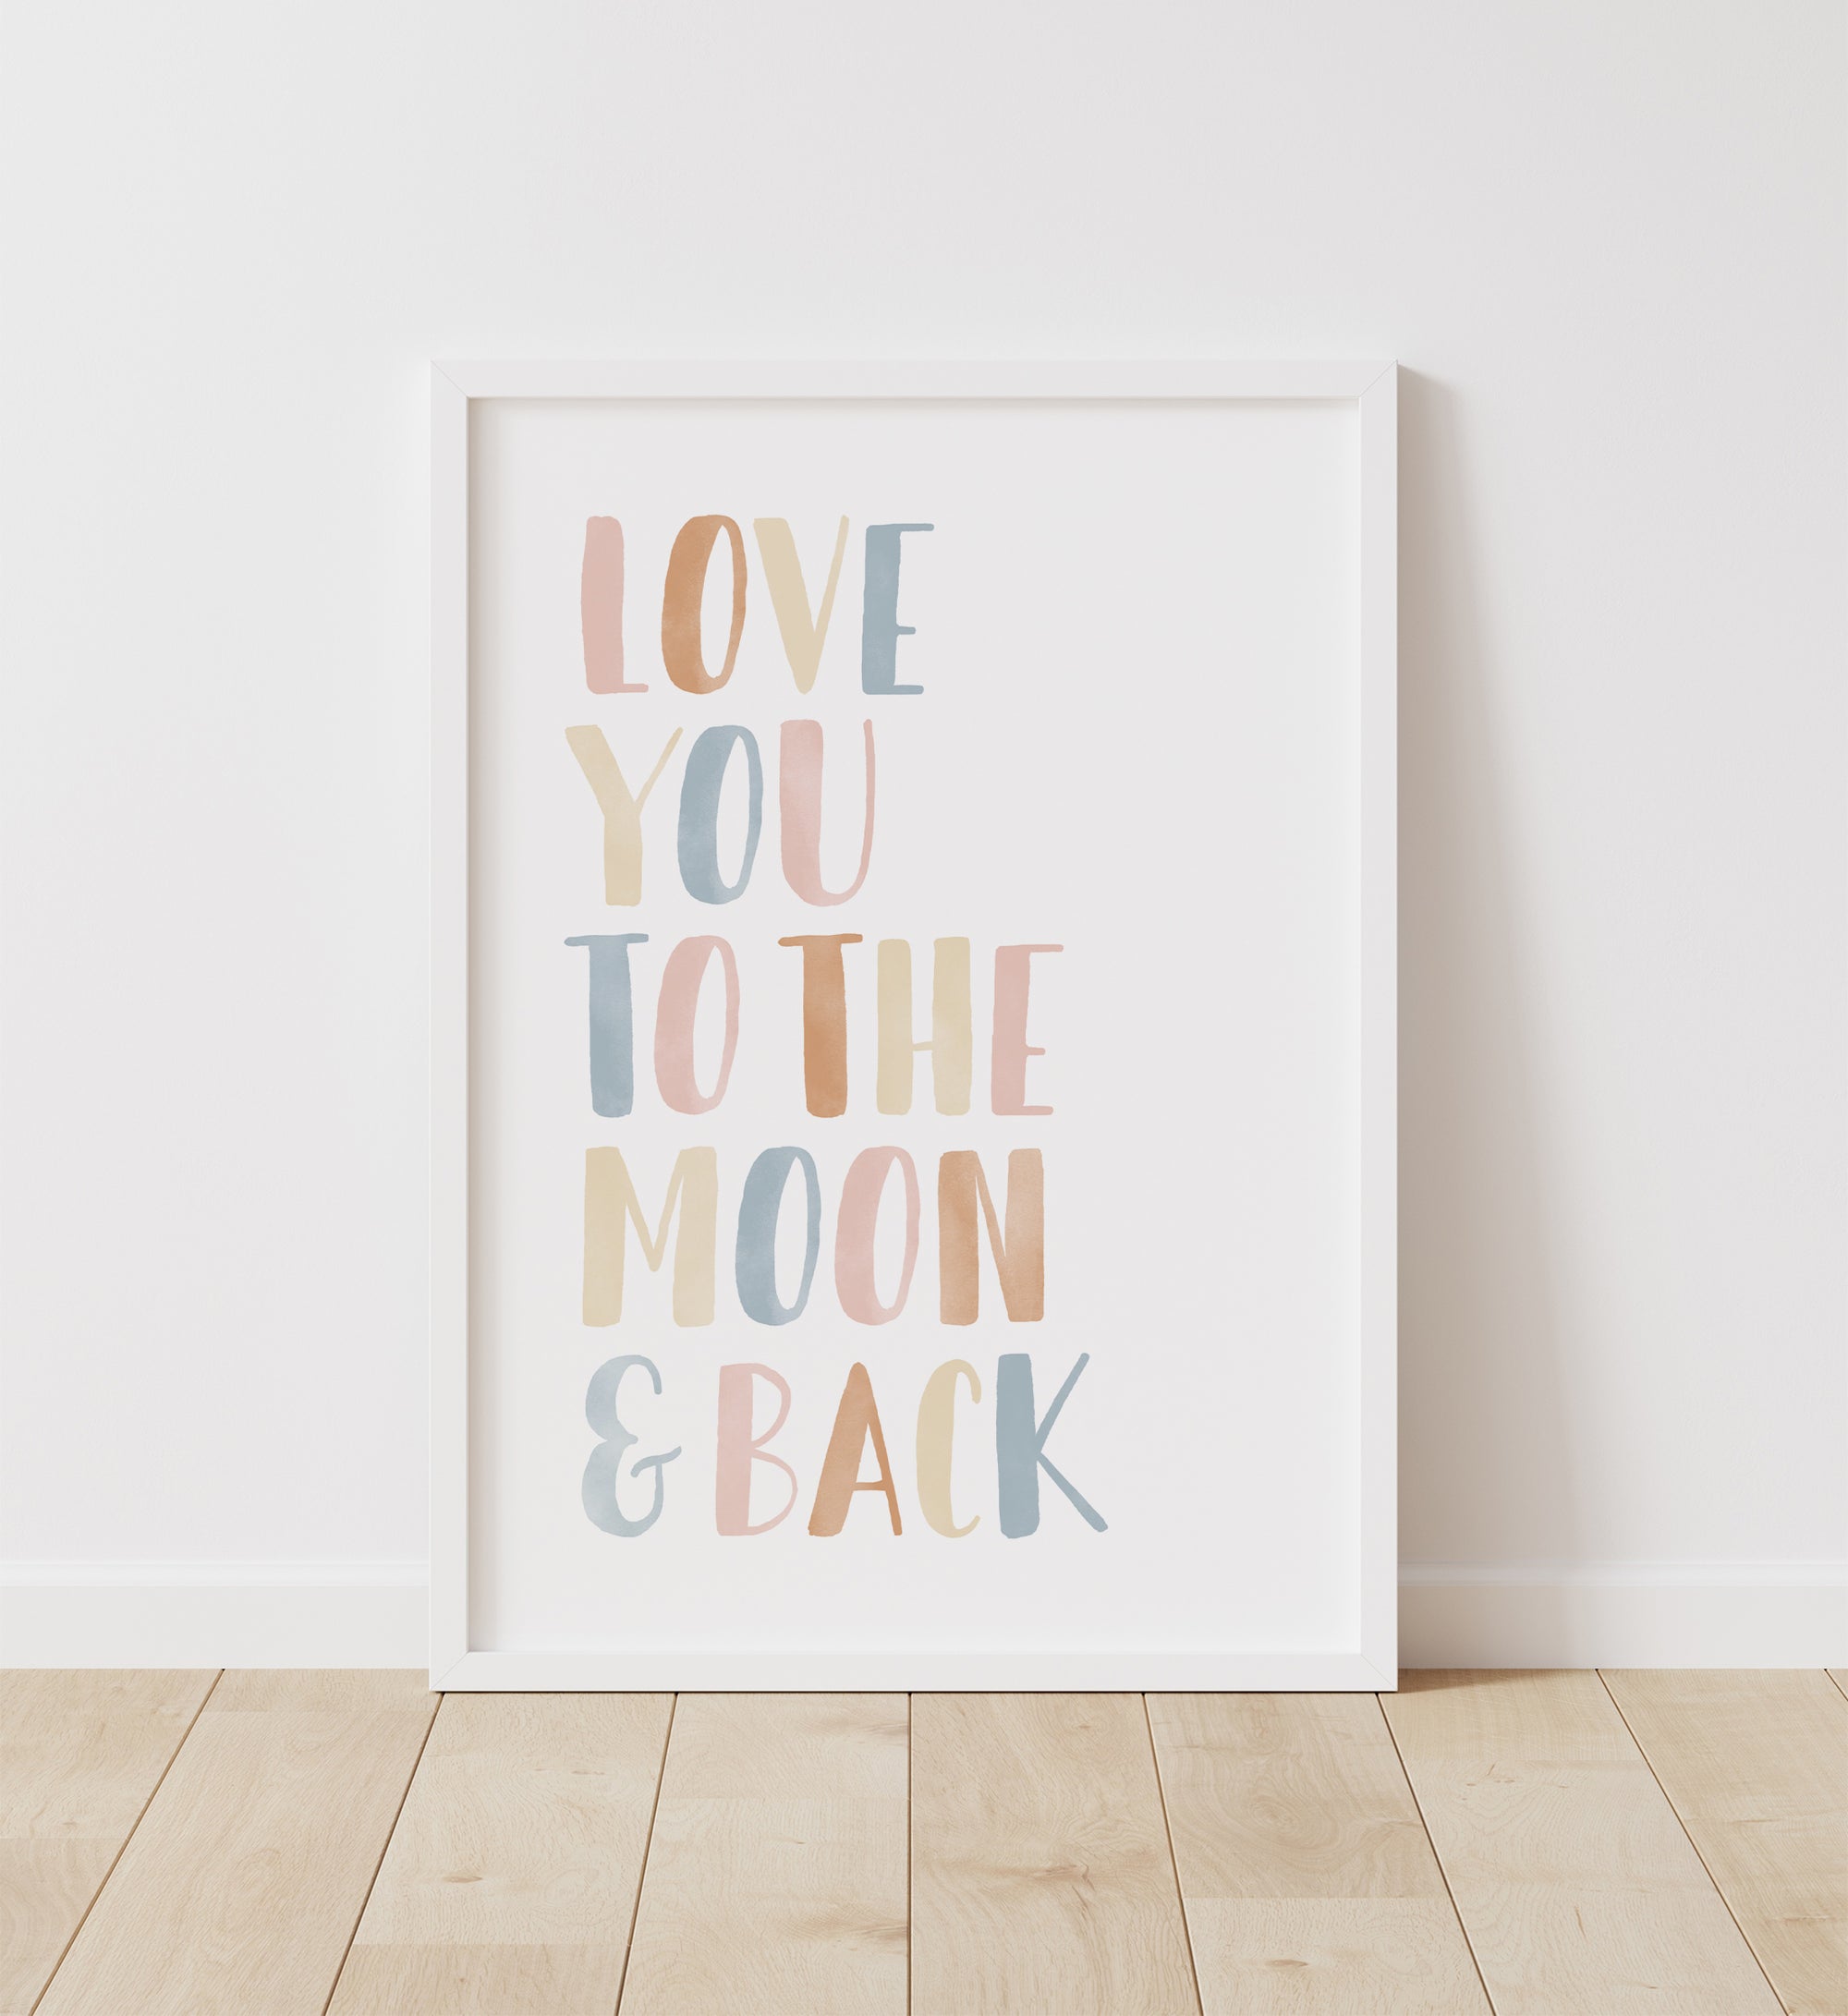 Love You to the Moon and Back Print - BHCP